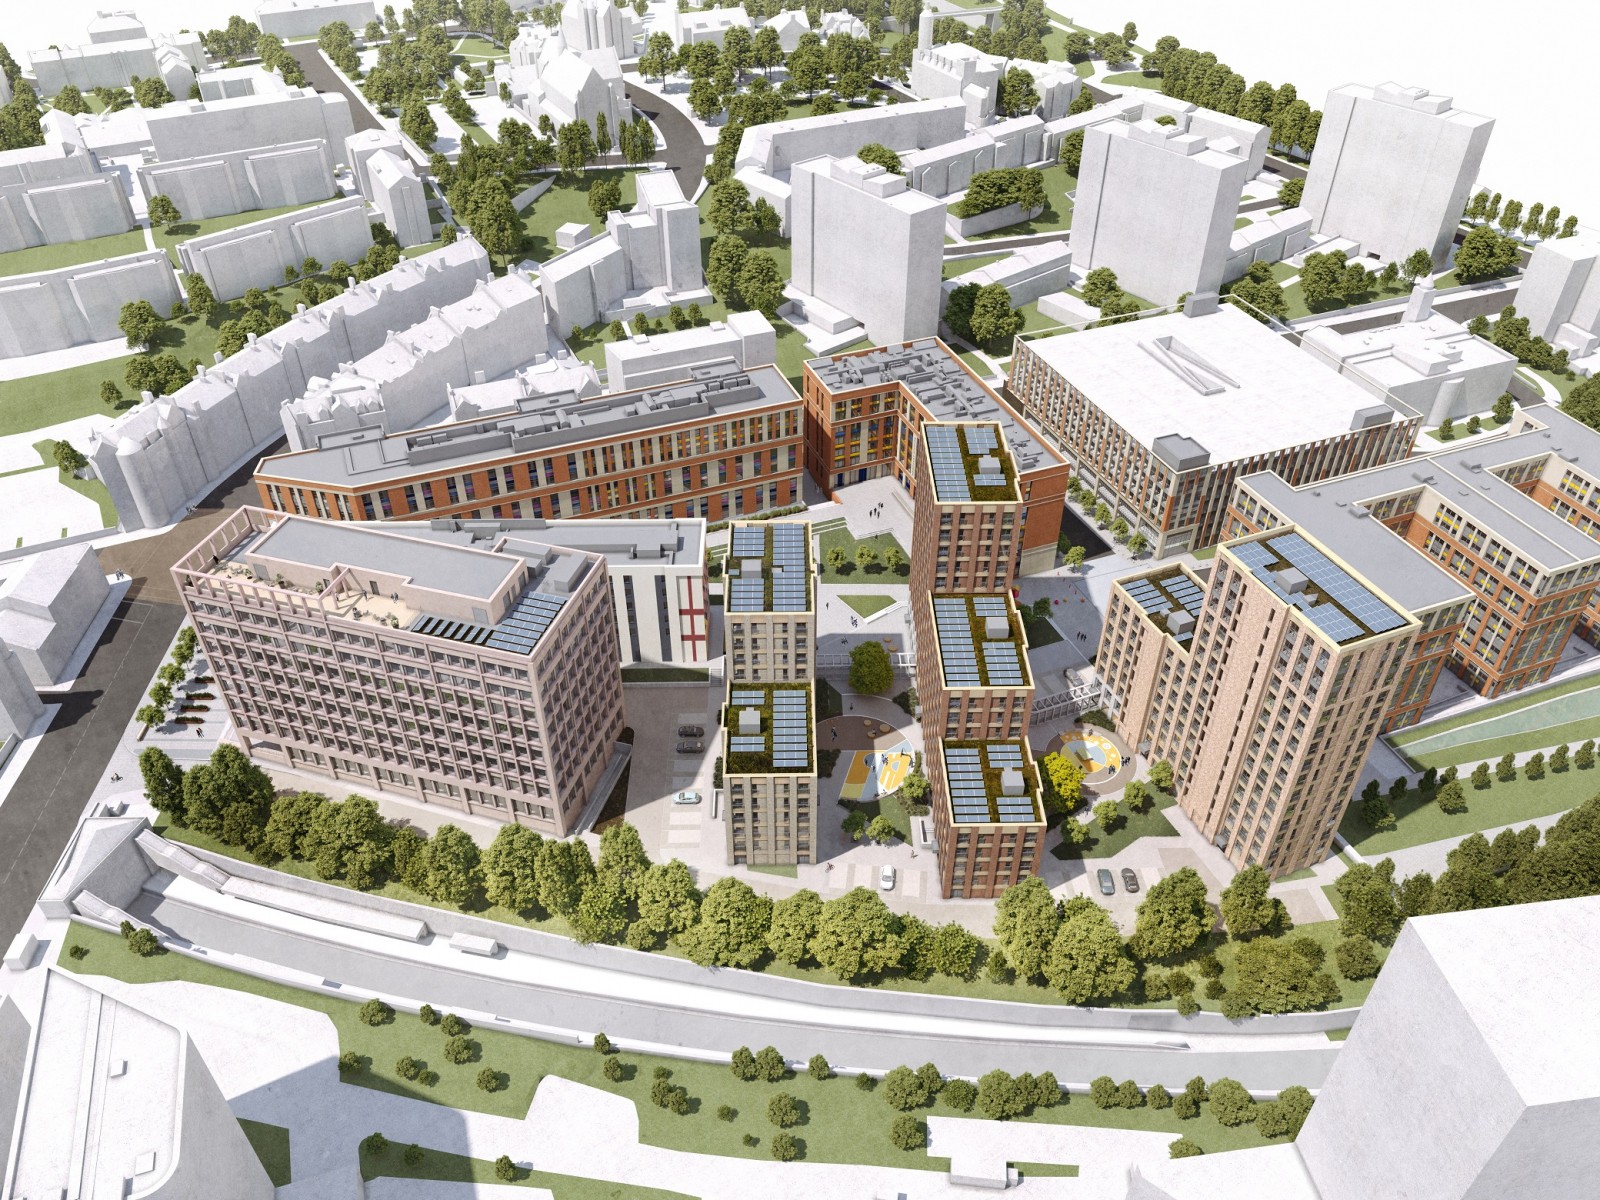 Mixed-use development plans lodged for Glasgow's Collegelands site